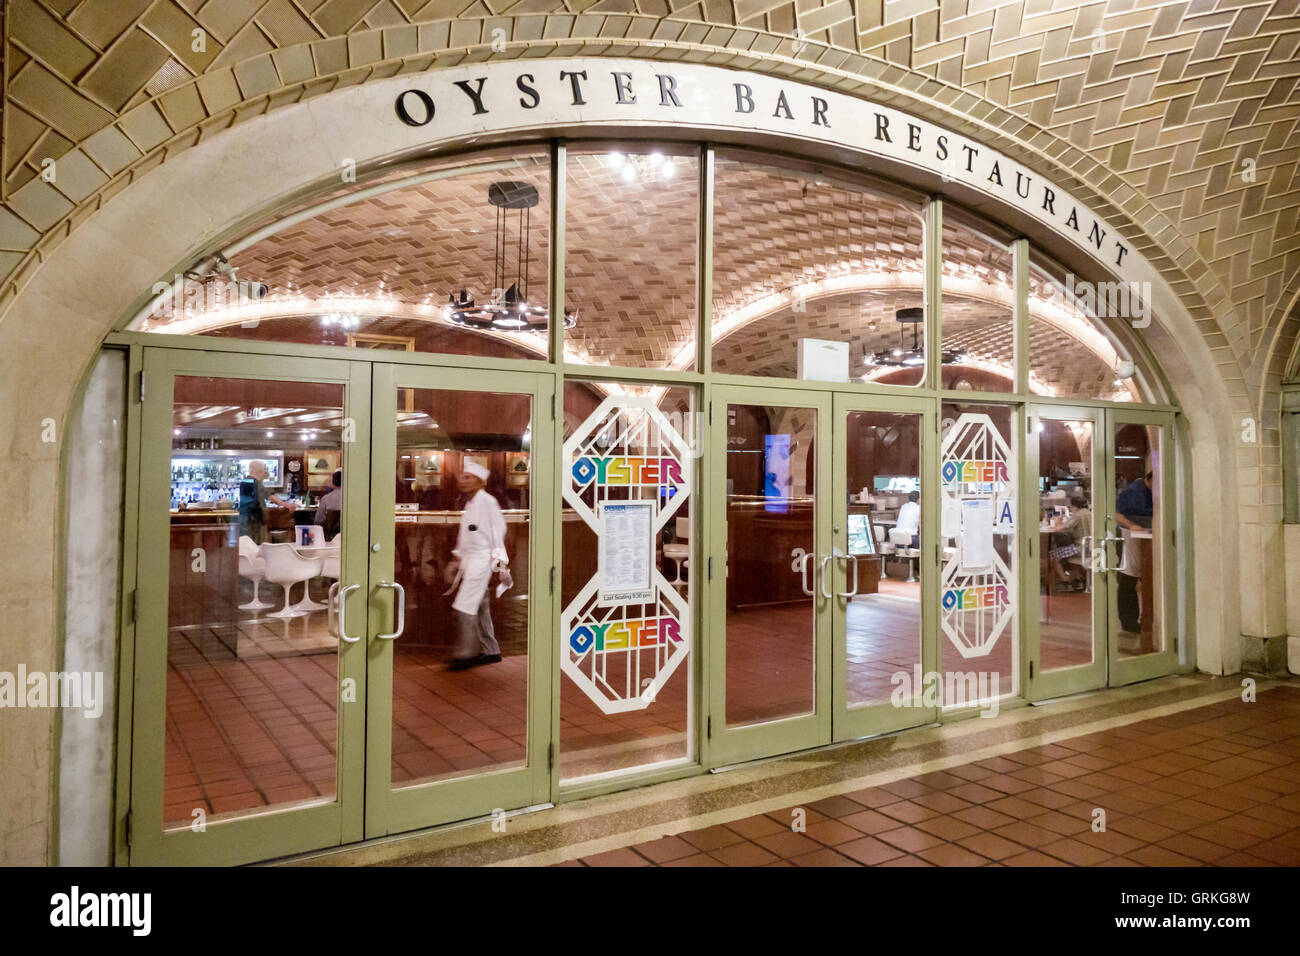 New York City, NY NYC Manhattan, Midtown, Grand Central Terminal, stazione, piano inferiore, Oyster Bar, ristorante ristoranti, ristoranti, ristoranti, caffè, pesce, lan Foto Stock